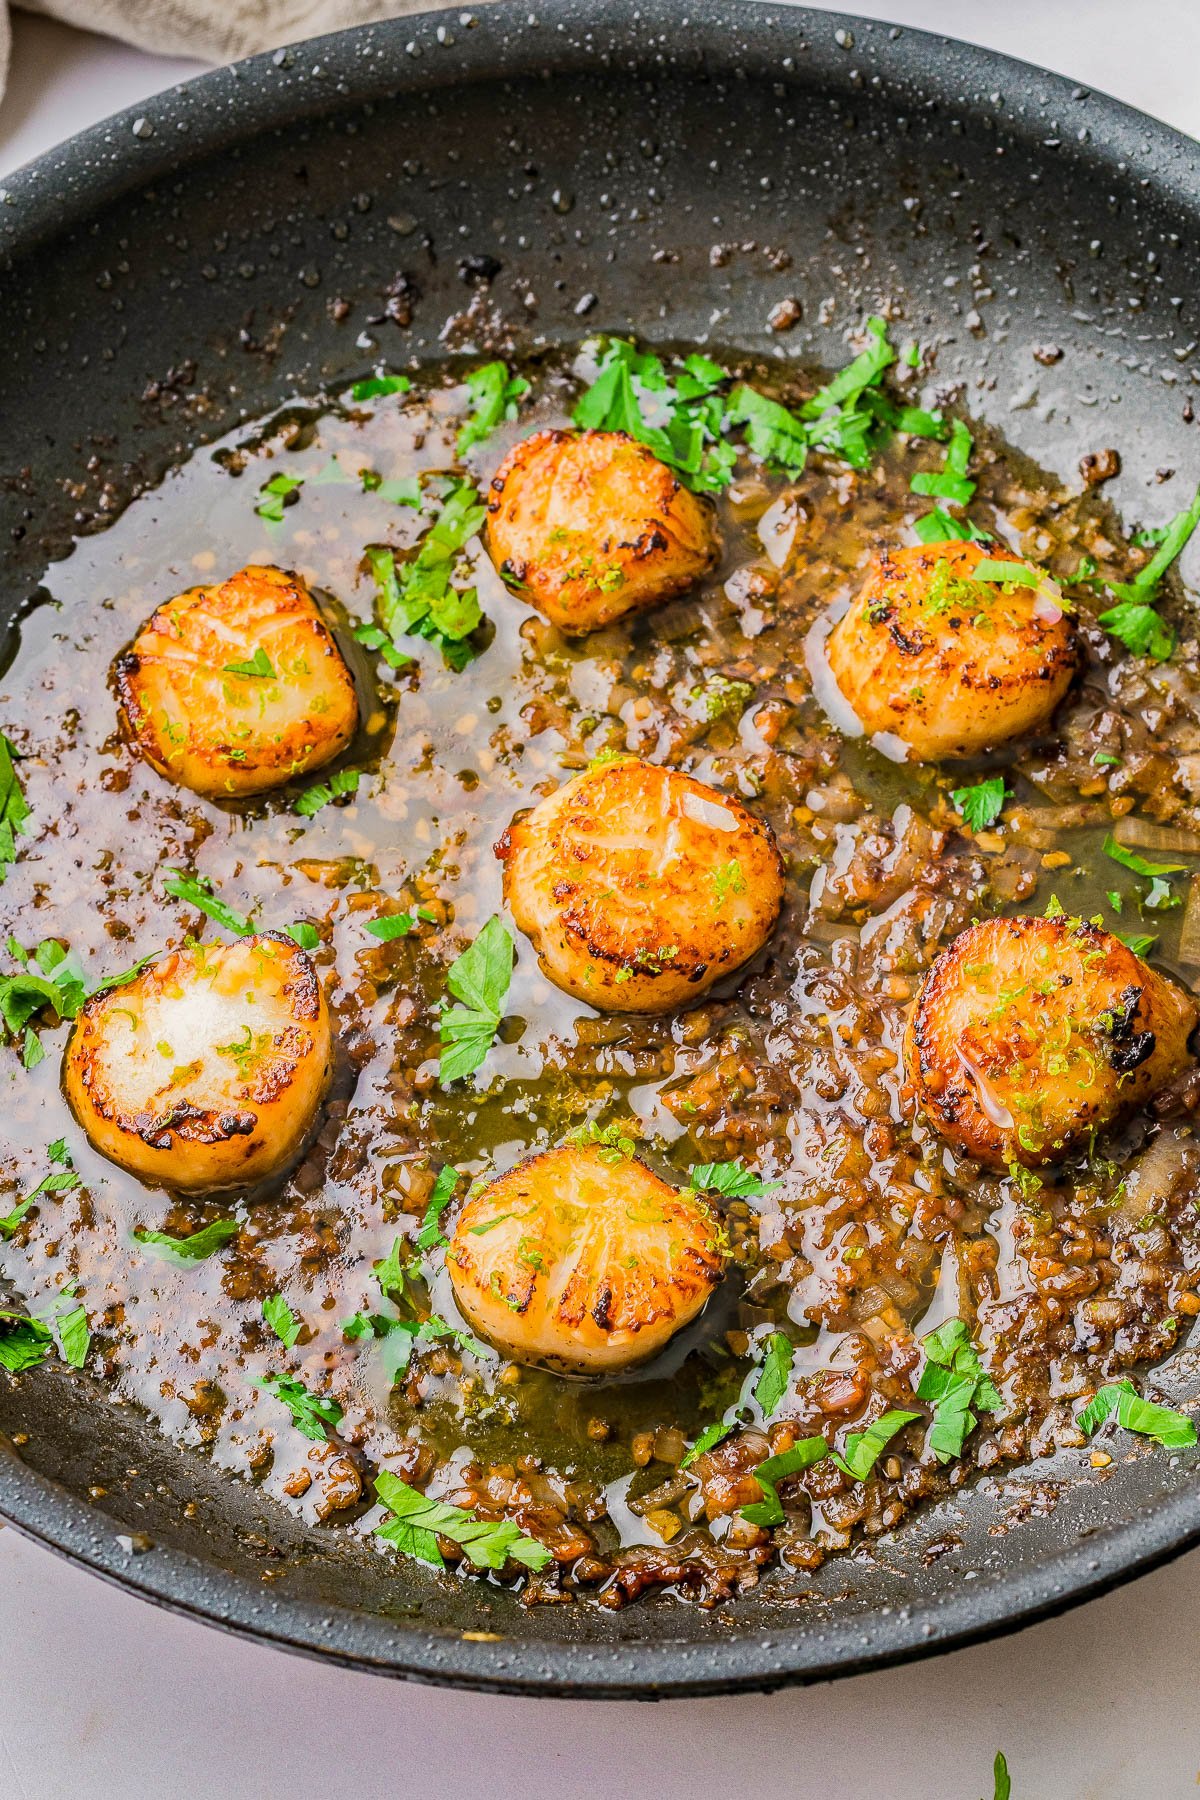 Garlic Butter Scallops - An EASY, one-skillet, 15-minute recipe that tastes restaurant-worthy, yet is incredibly SIMPLE to make at home! Even if you've never made scallops at home before, this is a foolproof recipe for pan-seared, tender, juicy scallops coated in garlic butter with lemon and citrus notes that's sure to IMPRESS! A wonderful choice for a special holiday meal, an anniversary or birthday dinner, or date-night-in! 